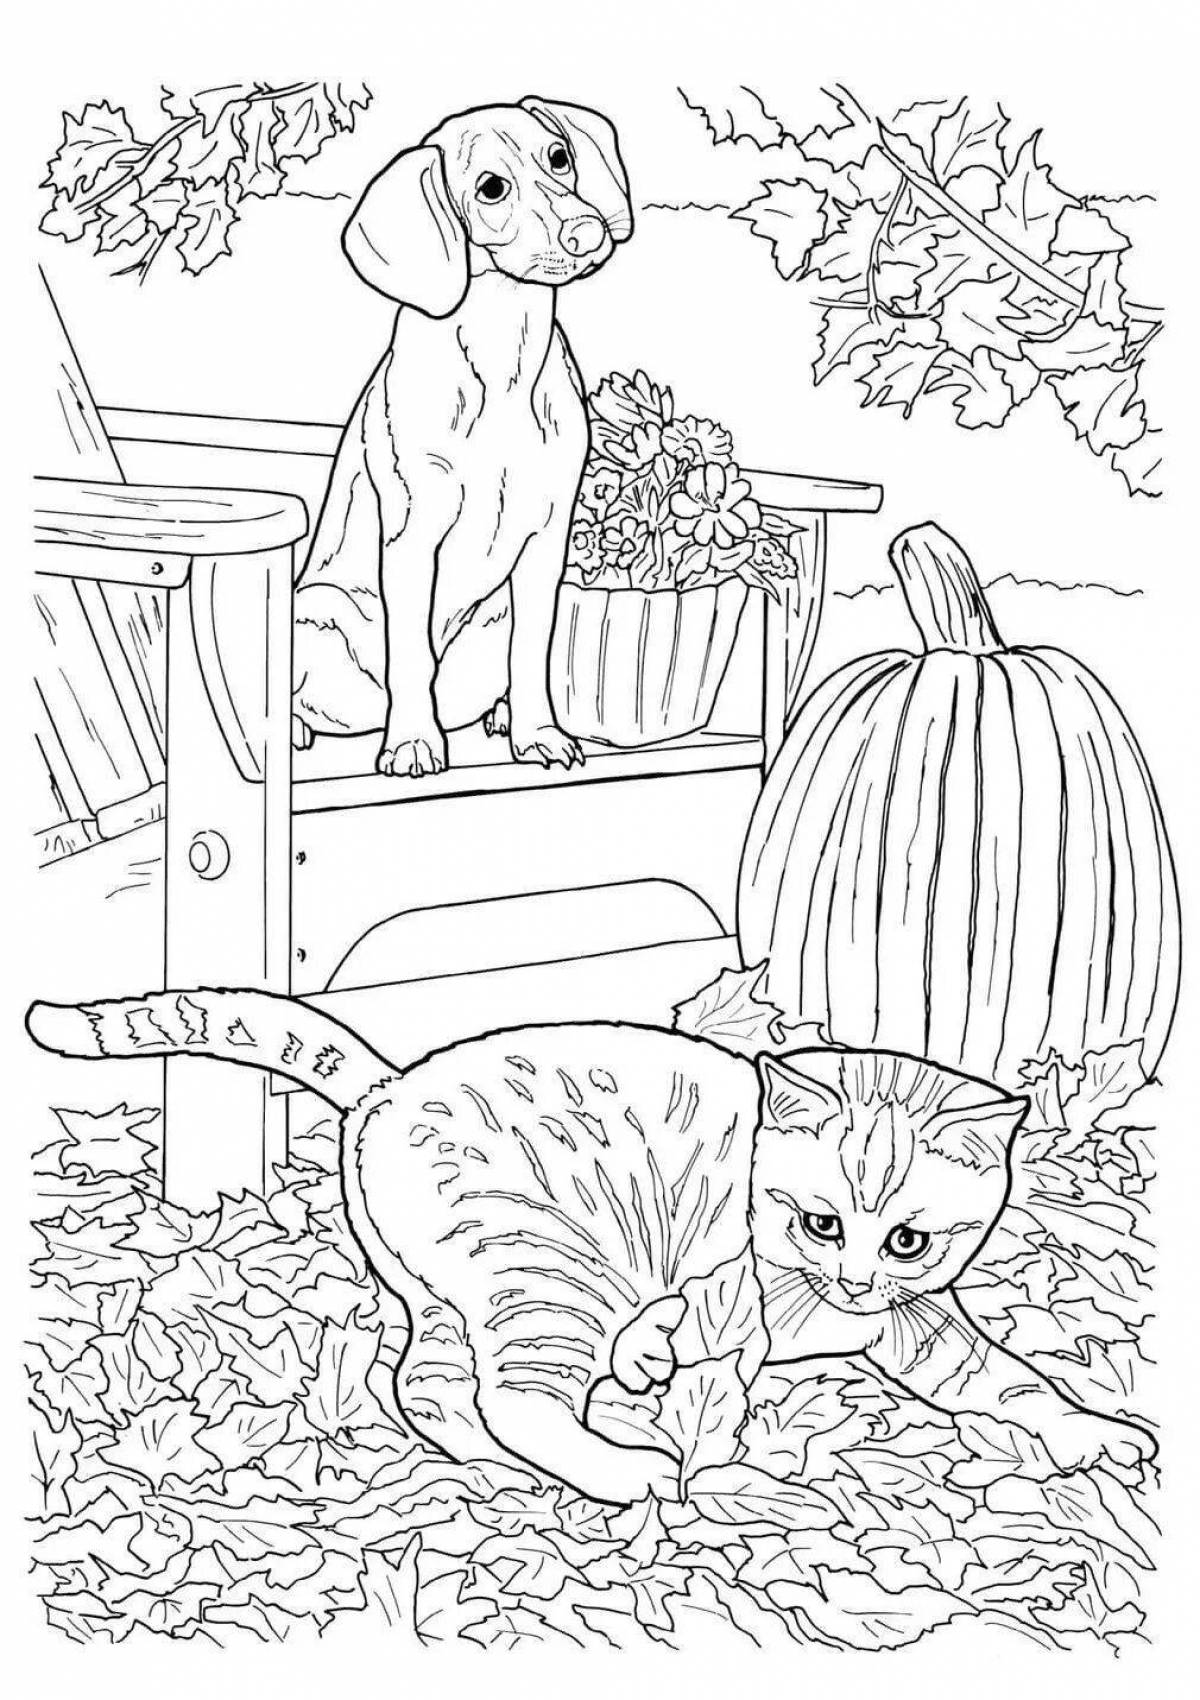 Coloring page frolicking kitten and dog